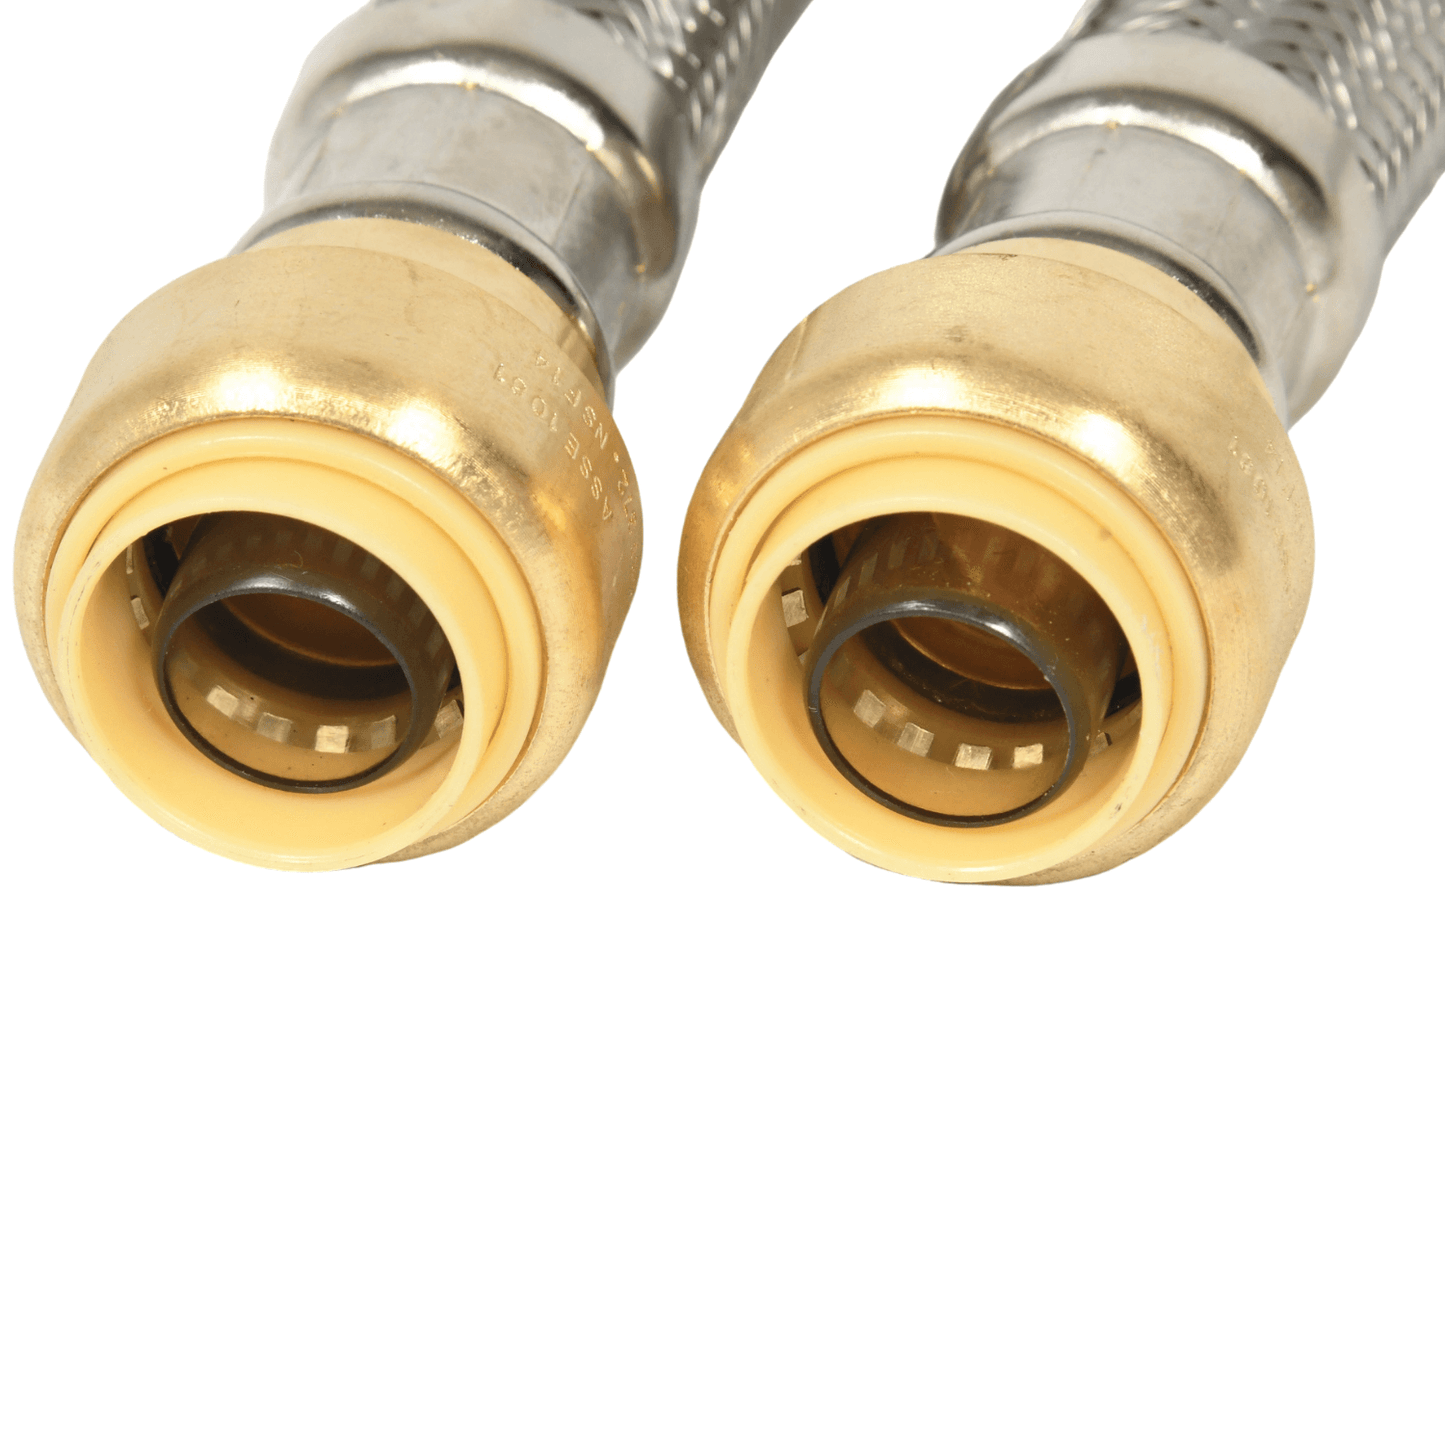 Hot Water Heater Connector Hose (2 Pack) - 2 FT - Stainless Steel